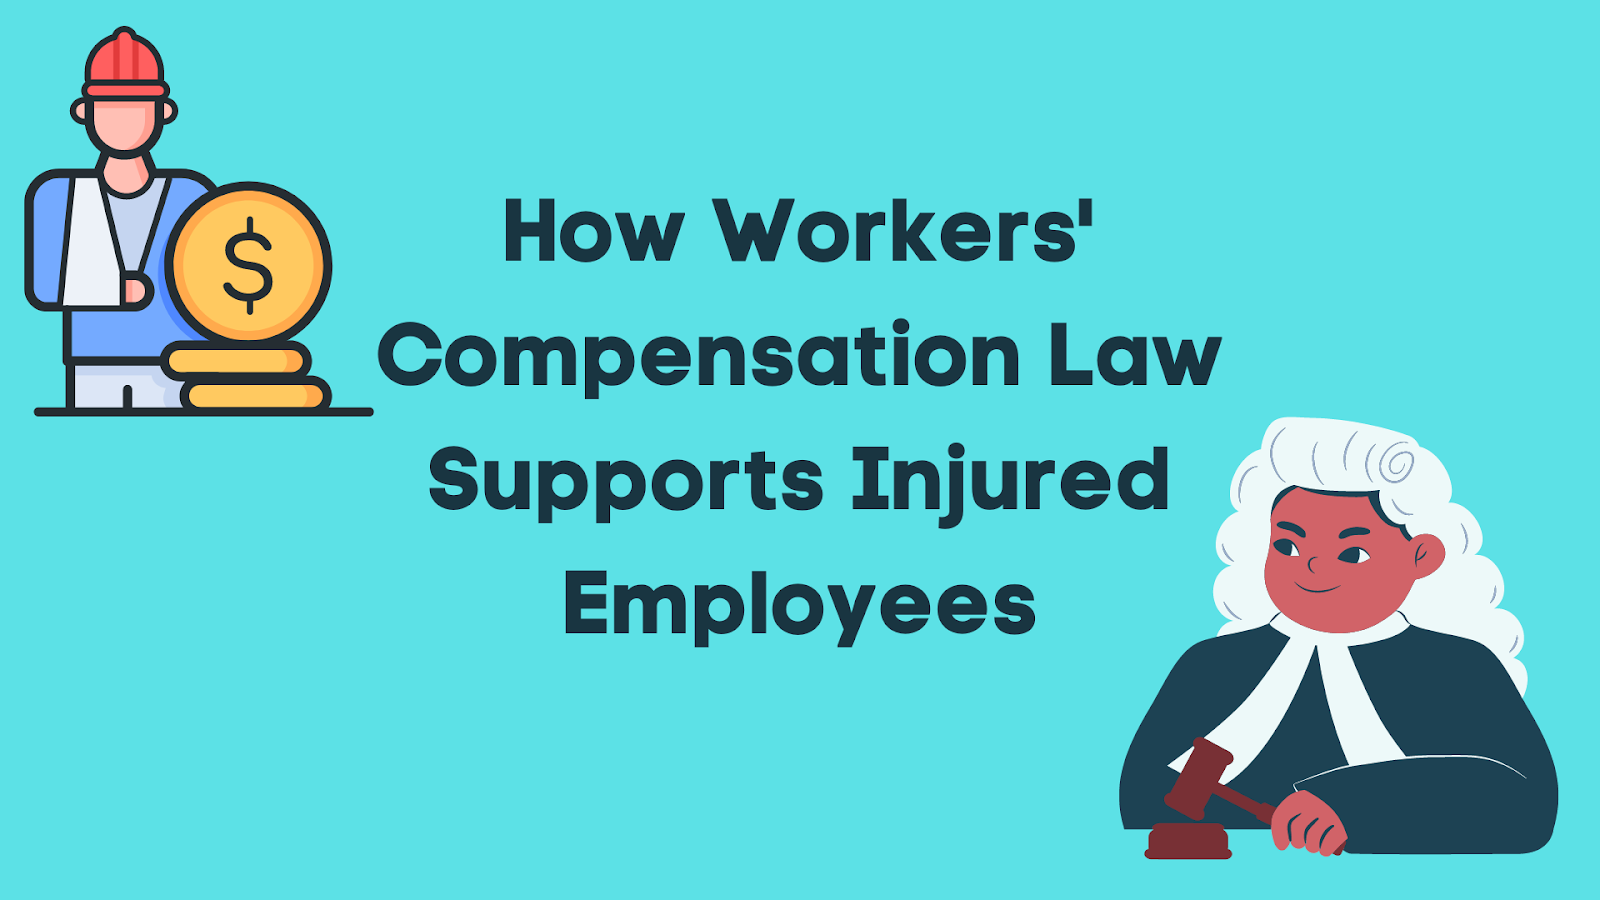 How Workers' Compensation Law Supports Injured Employees